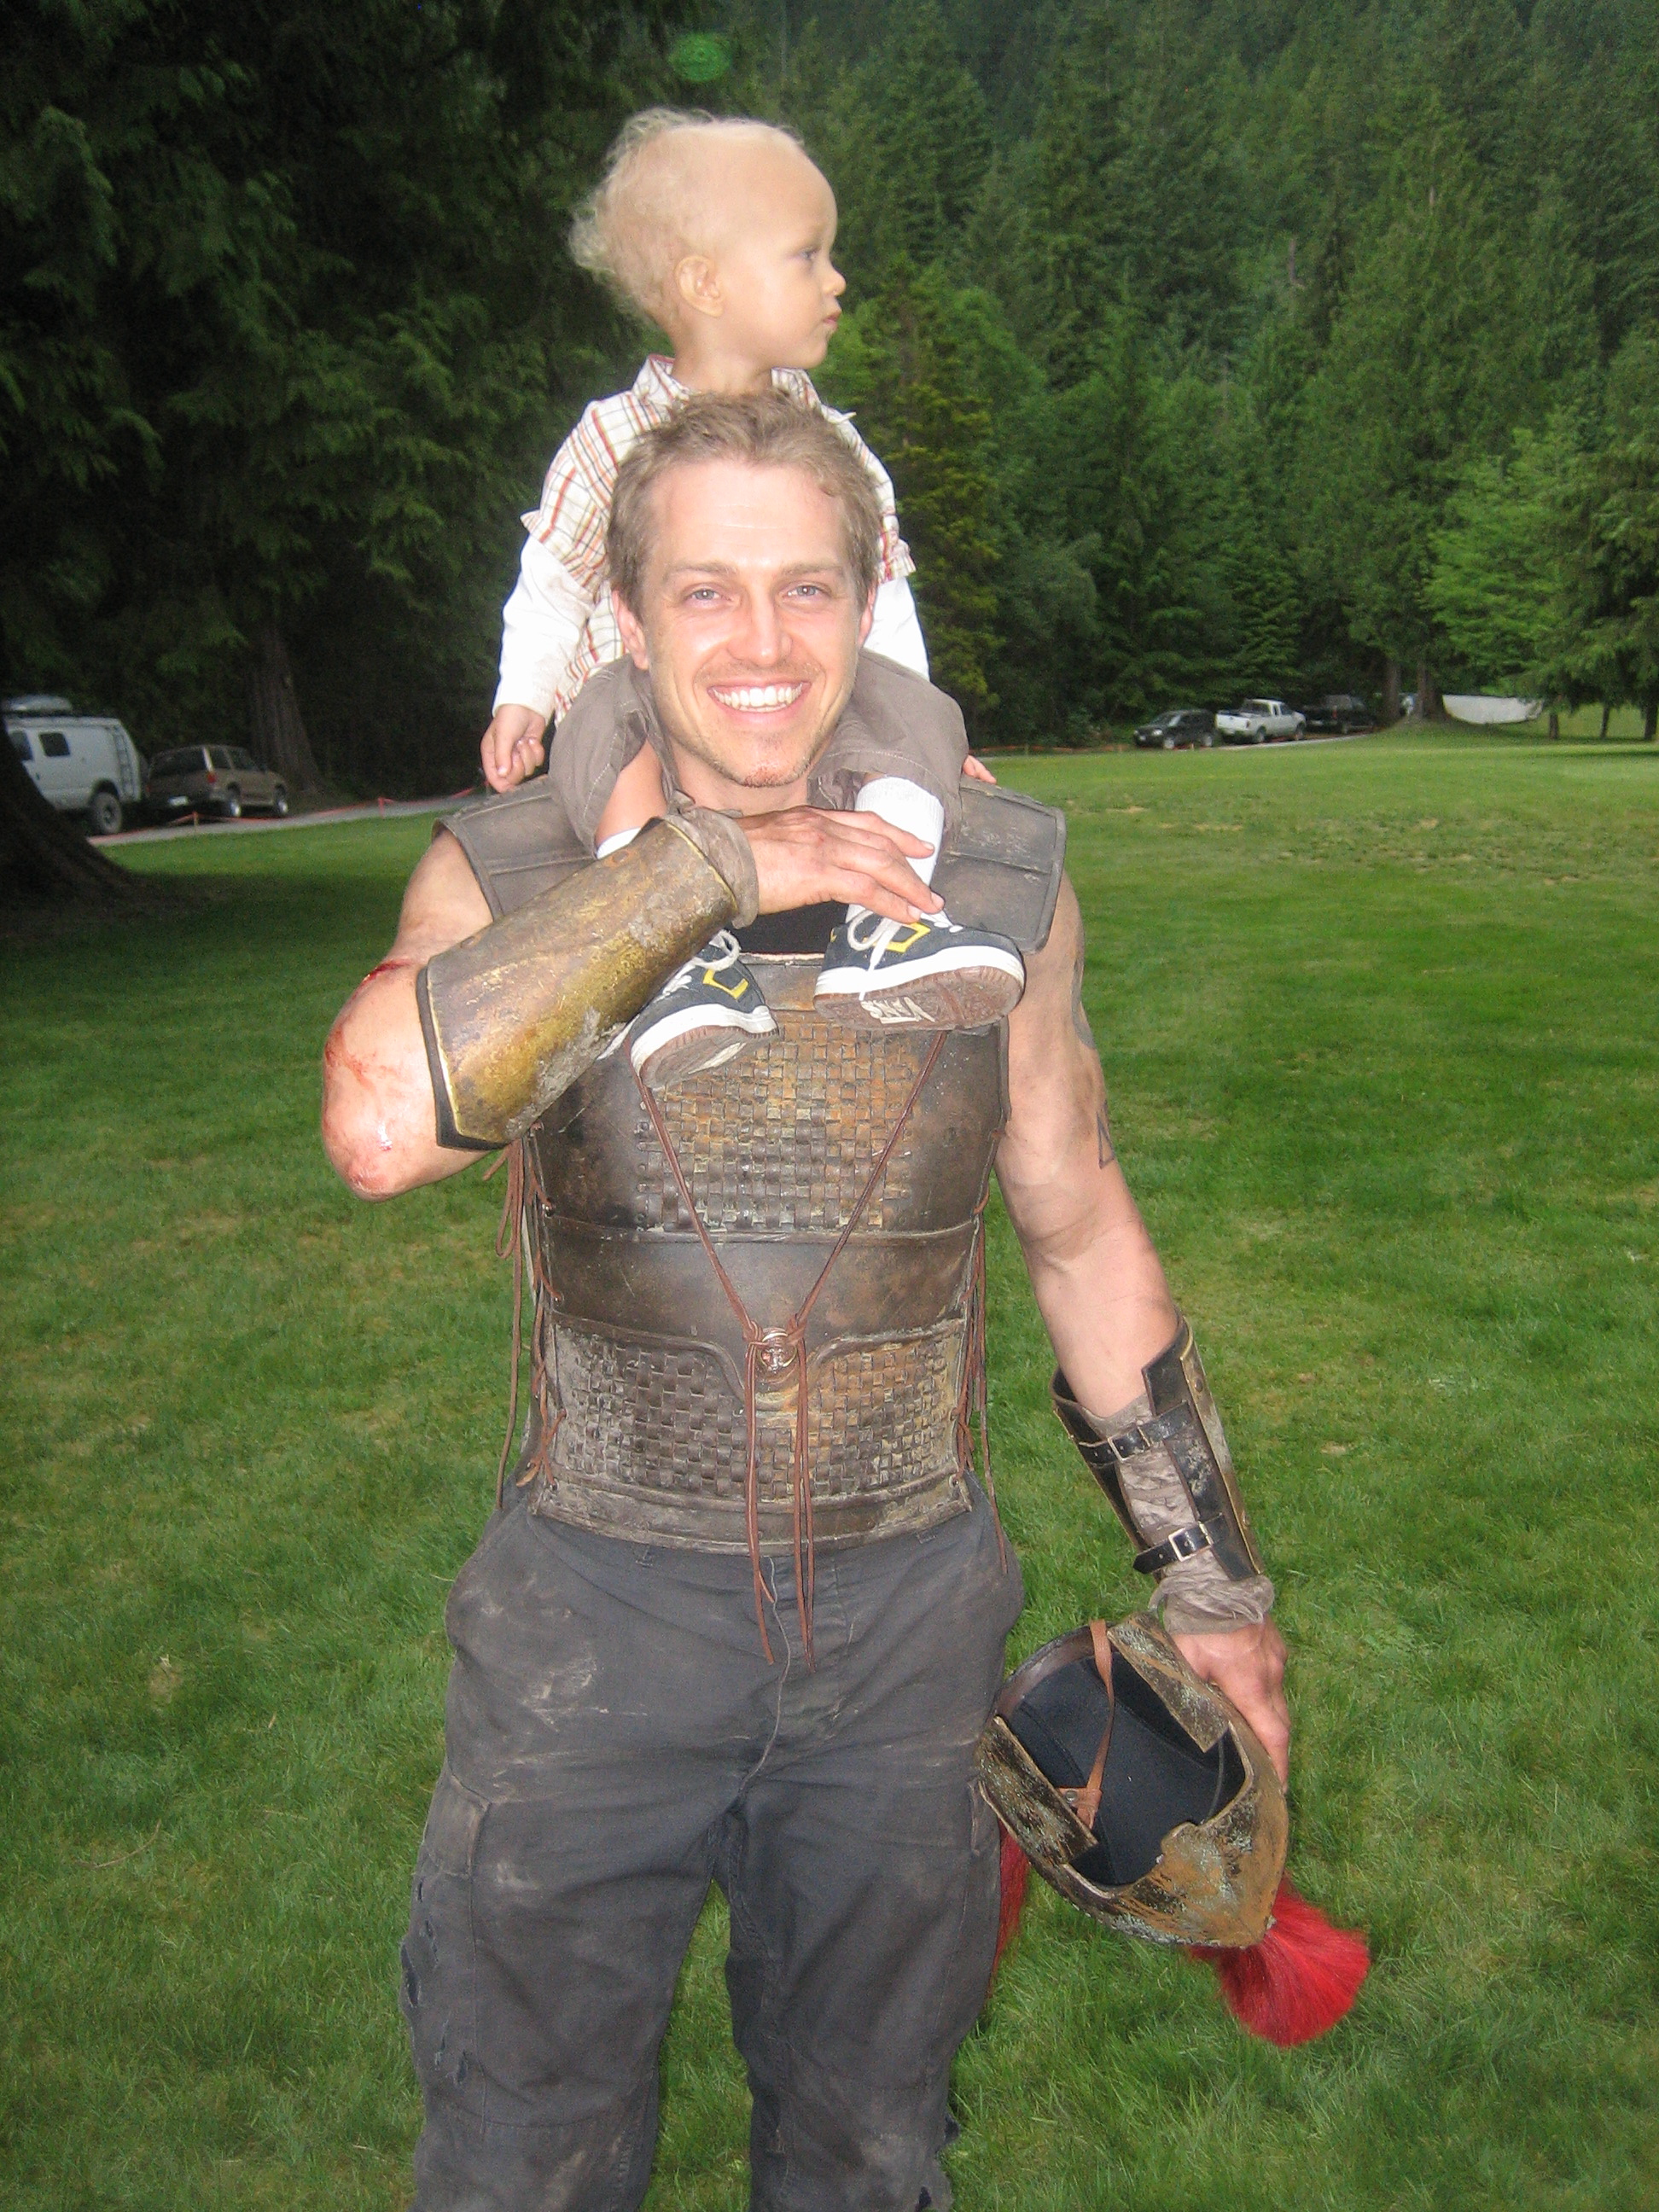 On Percy Jackson set with son, Caden.